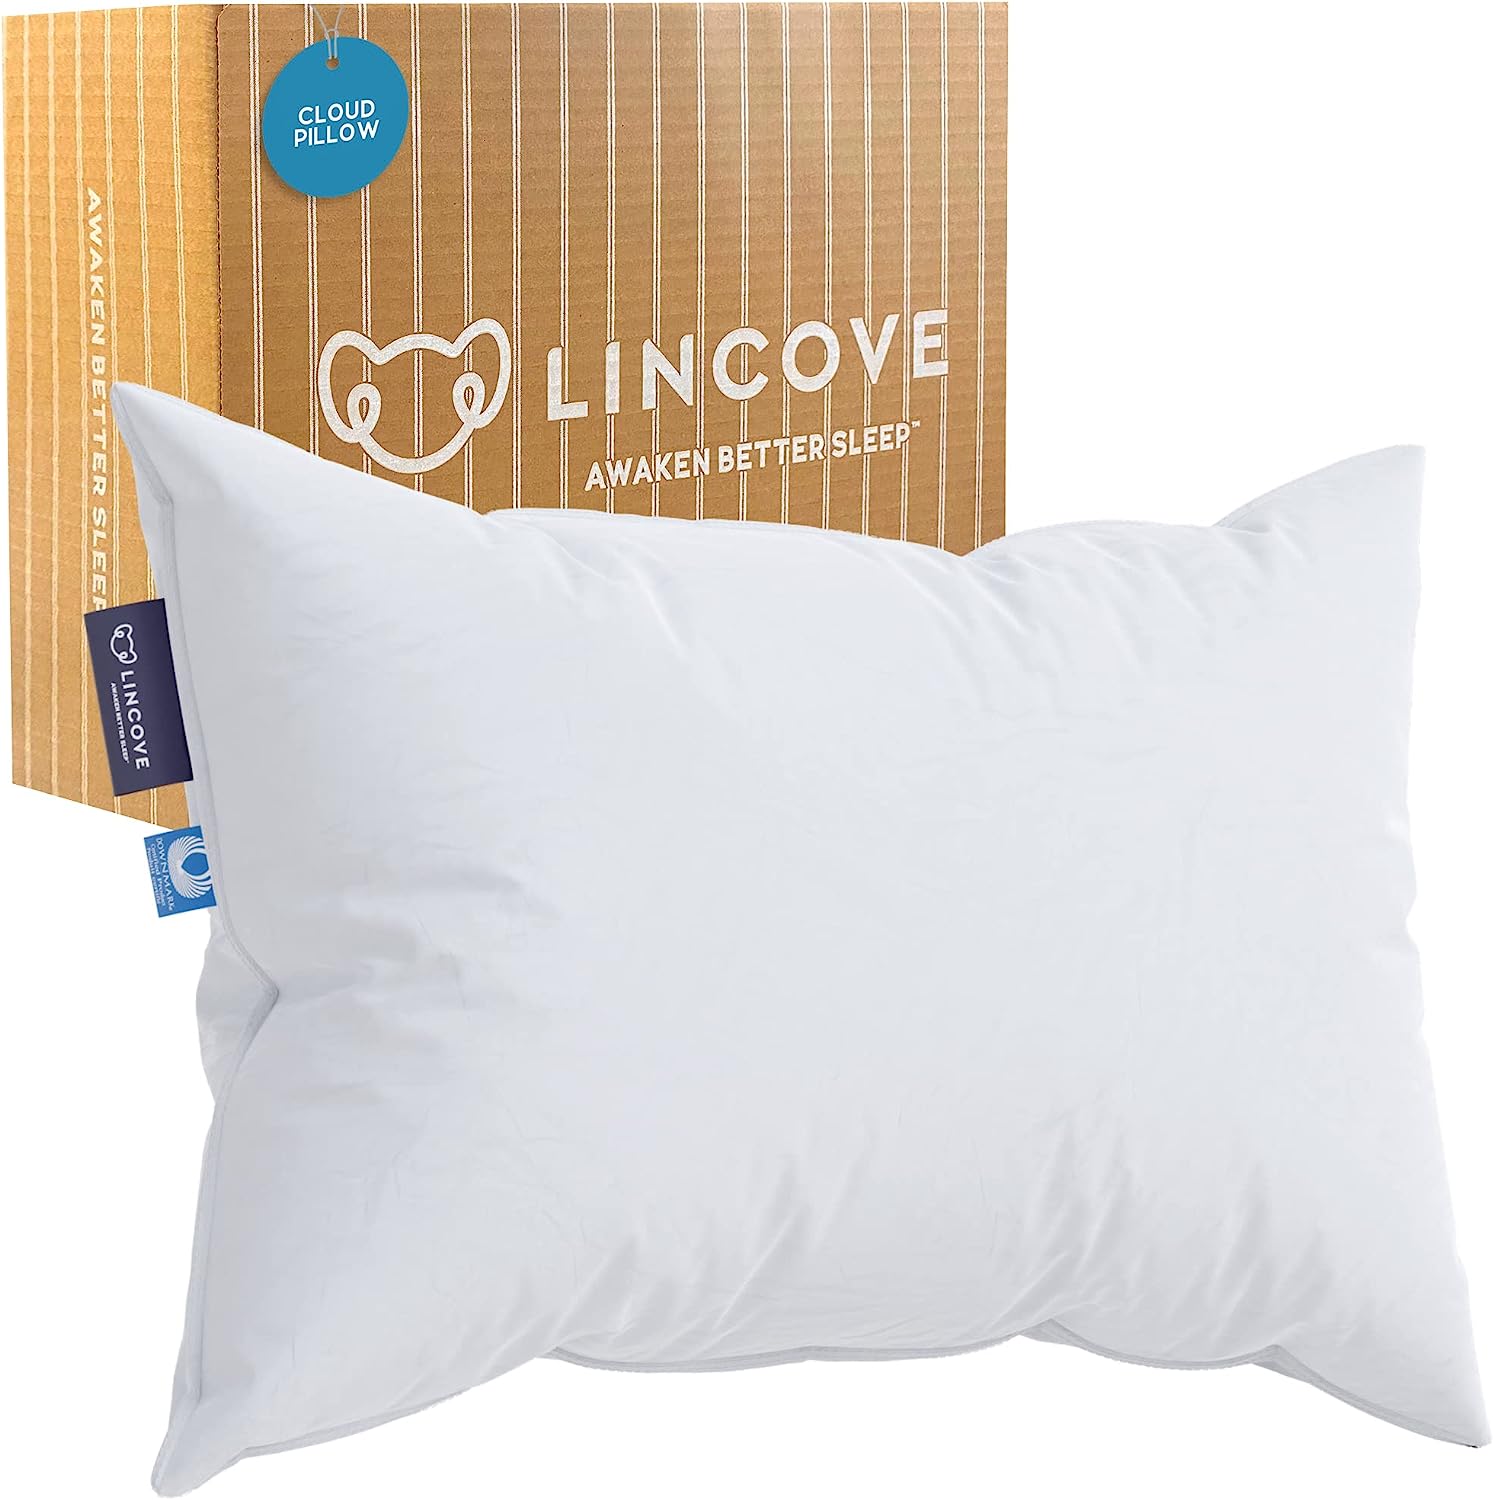 Lincove Cloud Natural Canadian White Down Luxury Sleeping Pillow - 625 Fill Power, 500 Thread Count 100% Cotton Shell, Made in Canada, Standard - Soft